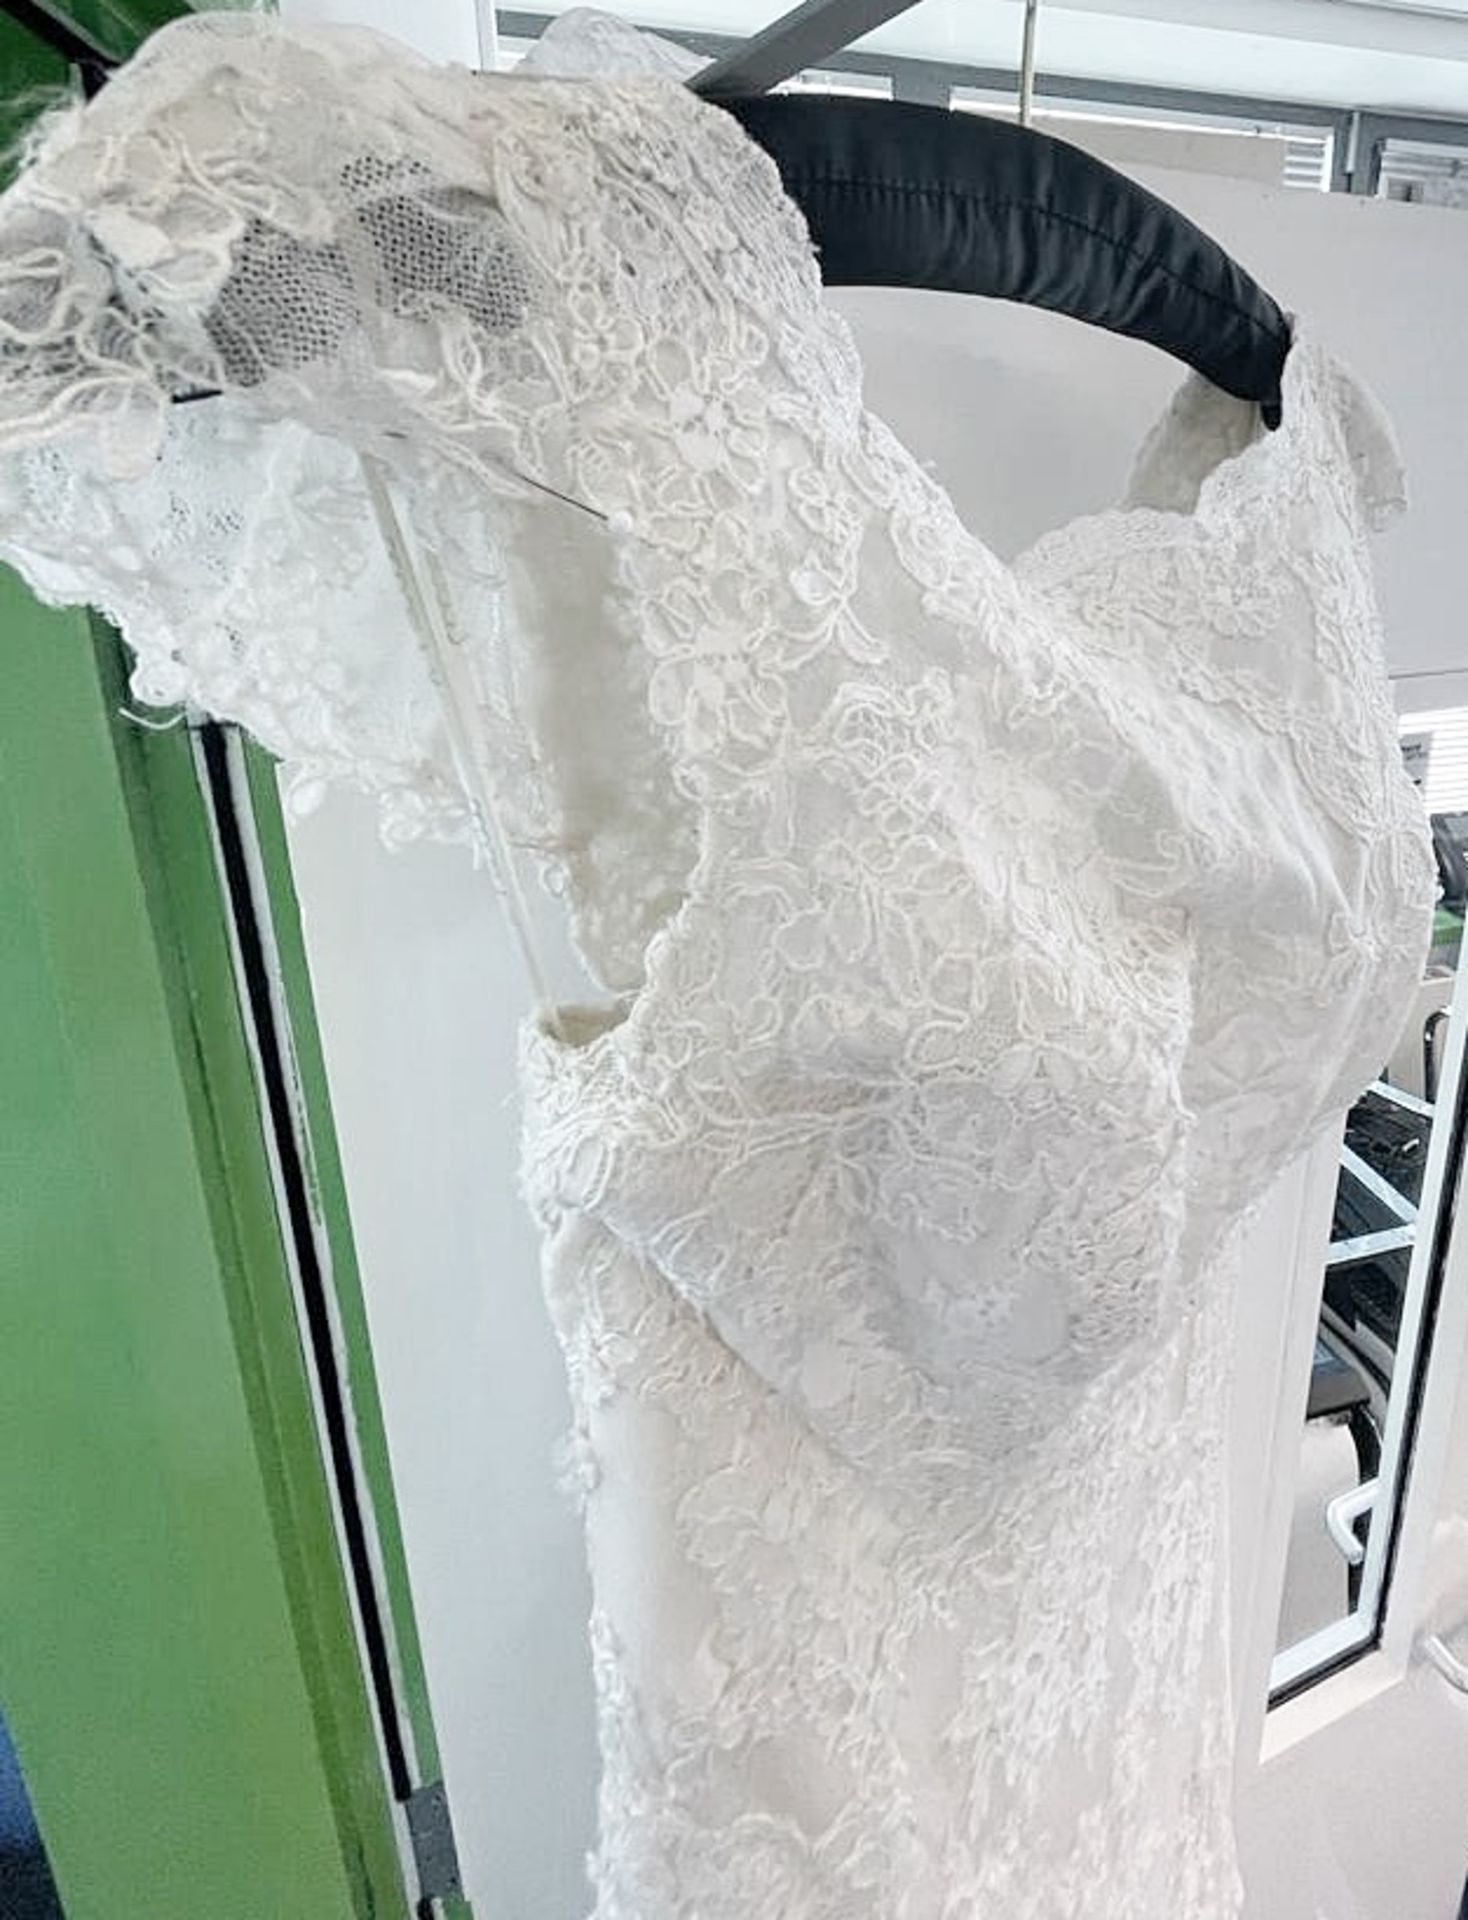 1 x LUSAN MANDONGUS 'Tabia' Fishtail Designer Wedding Dress Bridal Gown, With Chantilly Lace - Image 12 of 15